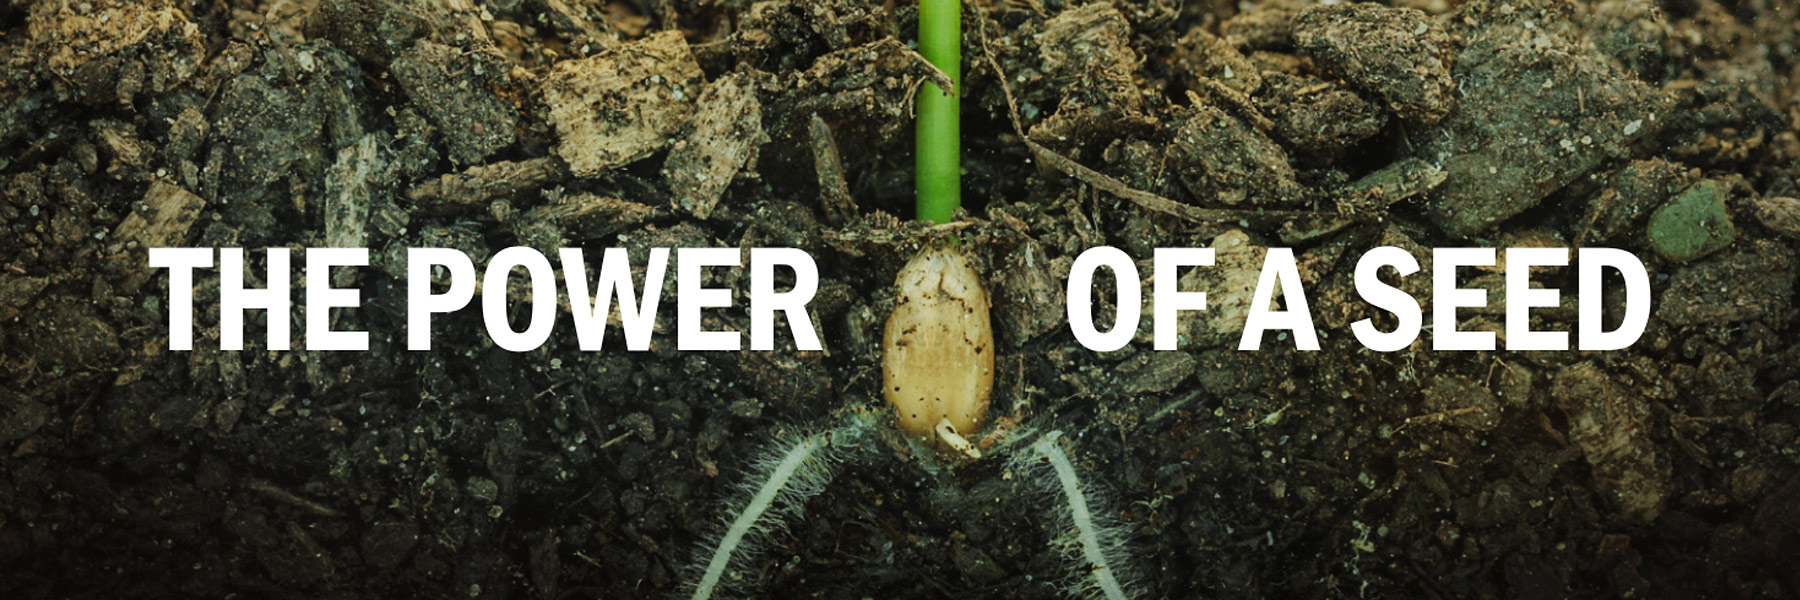 The Power of a Seed